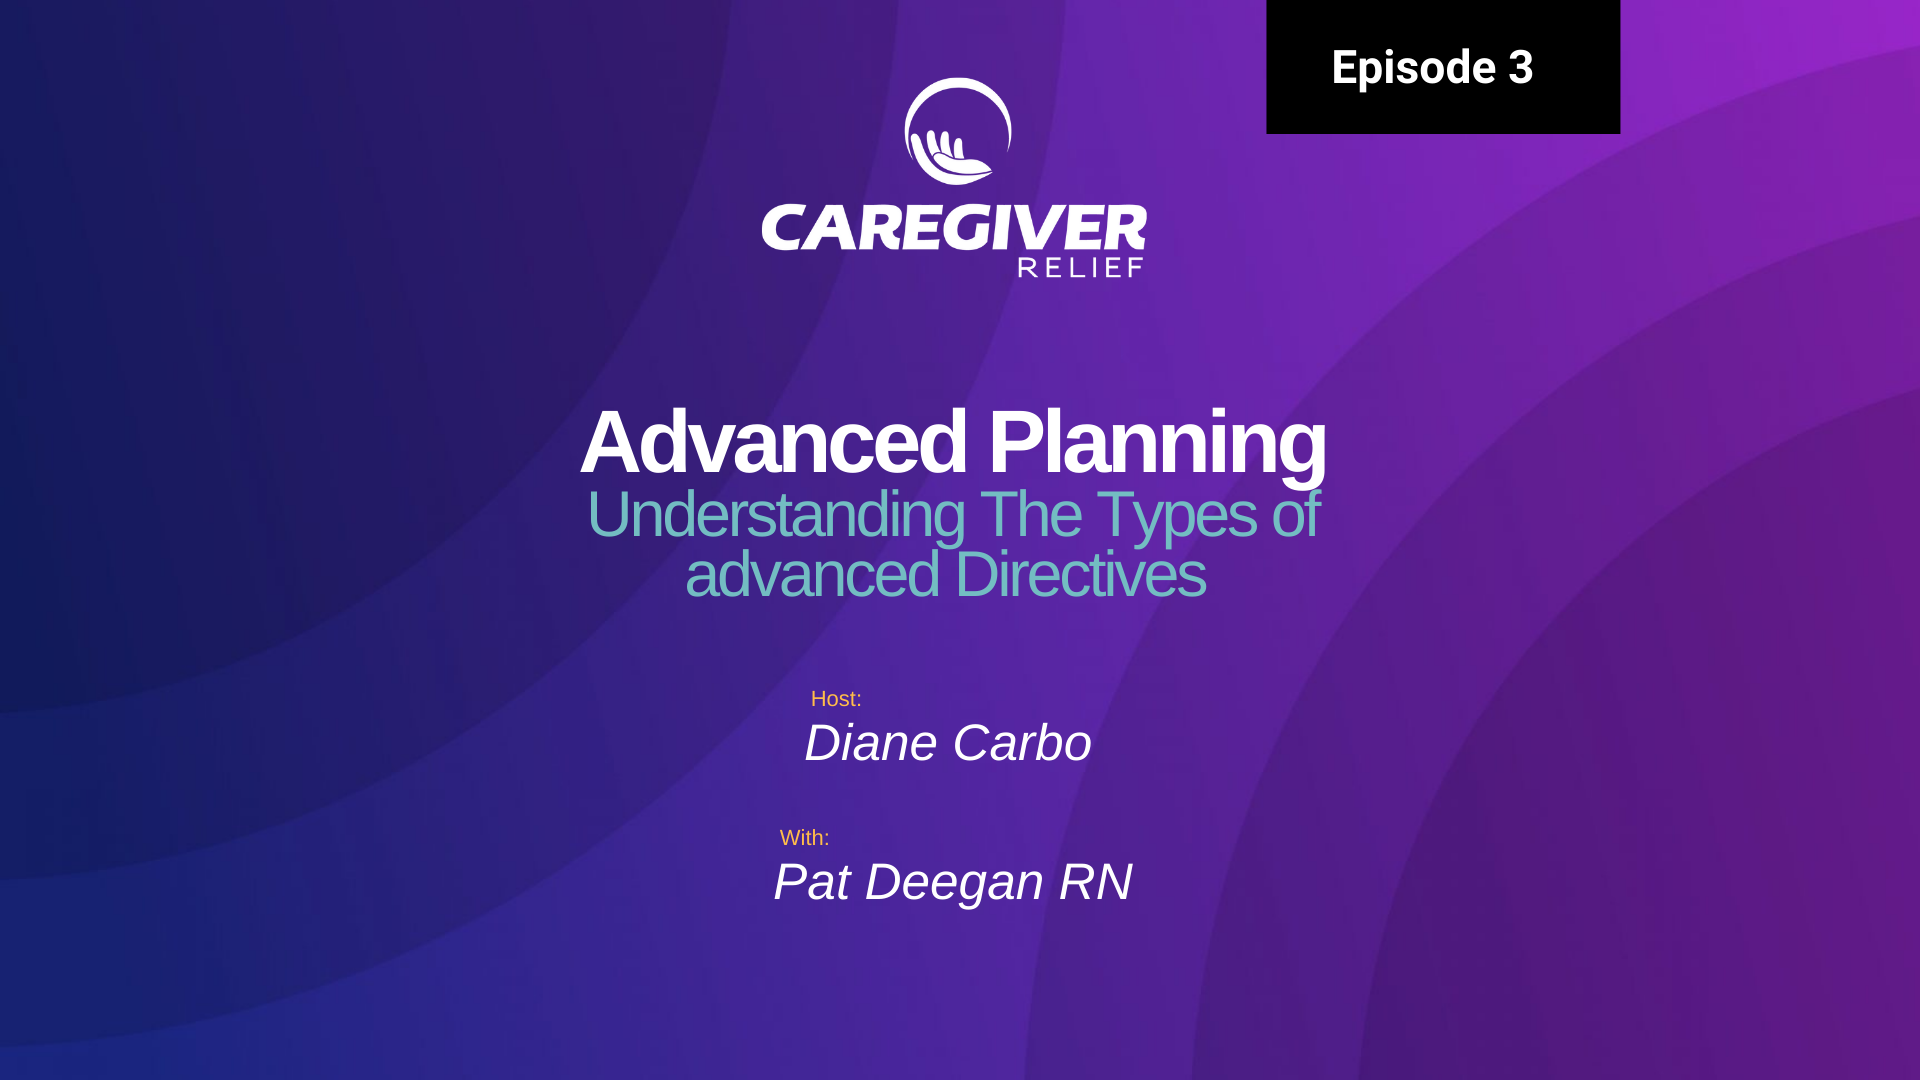 Episode 3 – Pat Deegan RN – Advanced Planning : Understanding advanced Directives and the different types of advanced directives